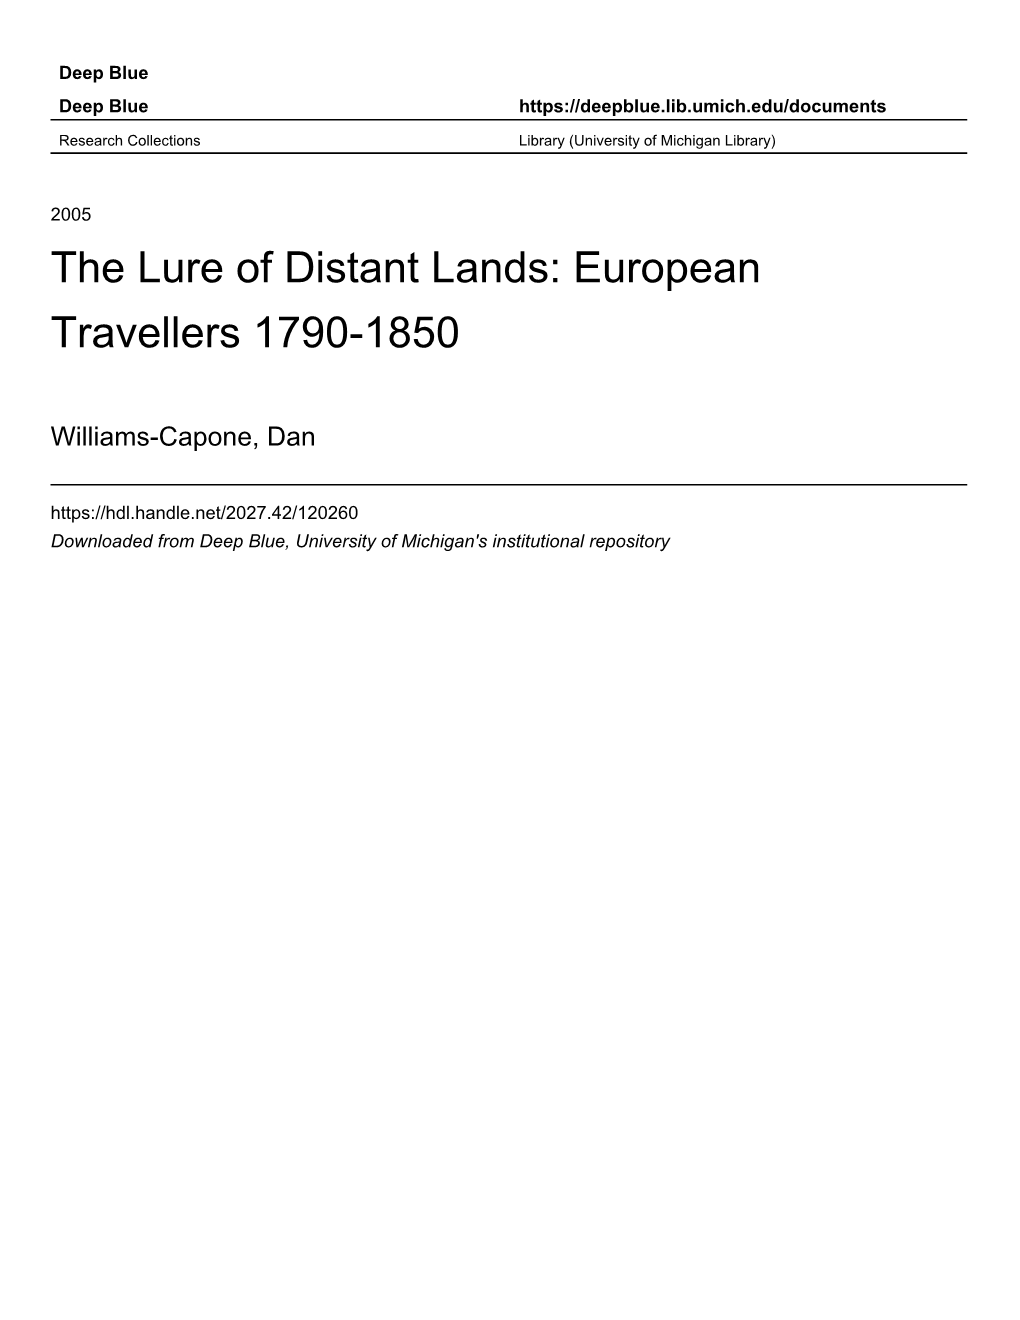 The Lure of Distant Lands: European Travellers 1790-1850